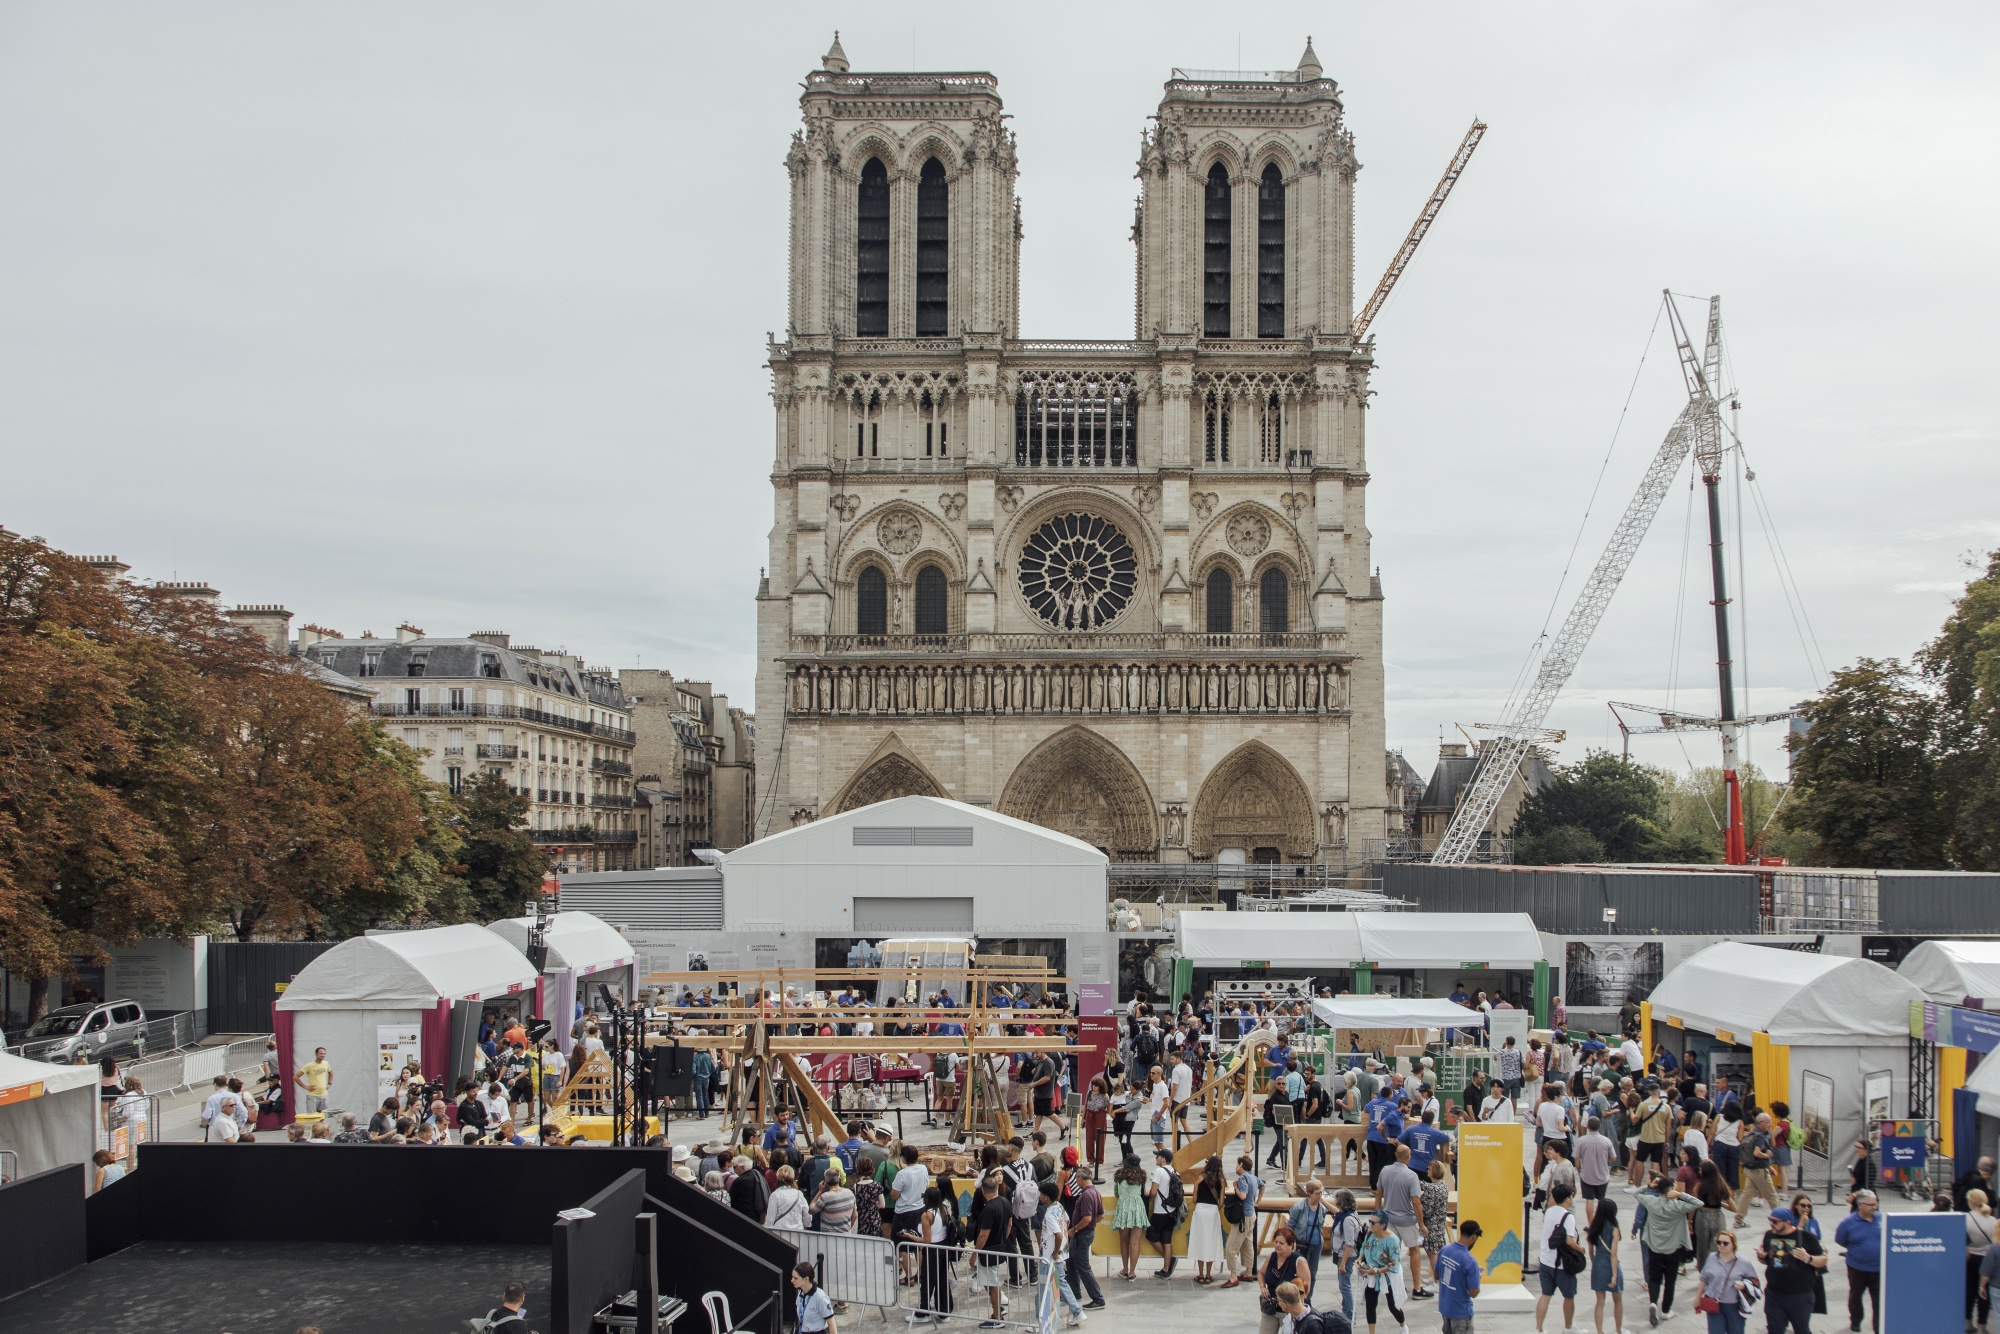 Summer Travel in Paris Seen as Dry Run for 2024 Olympic Games - Bloomberg